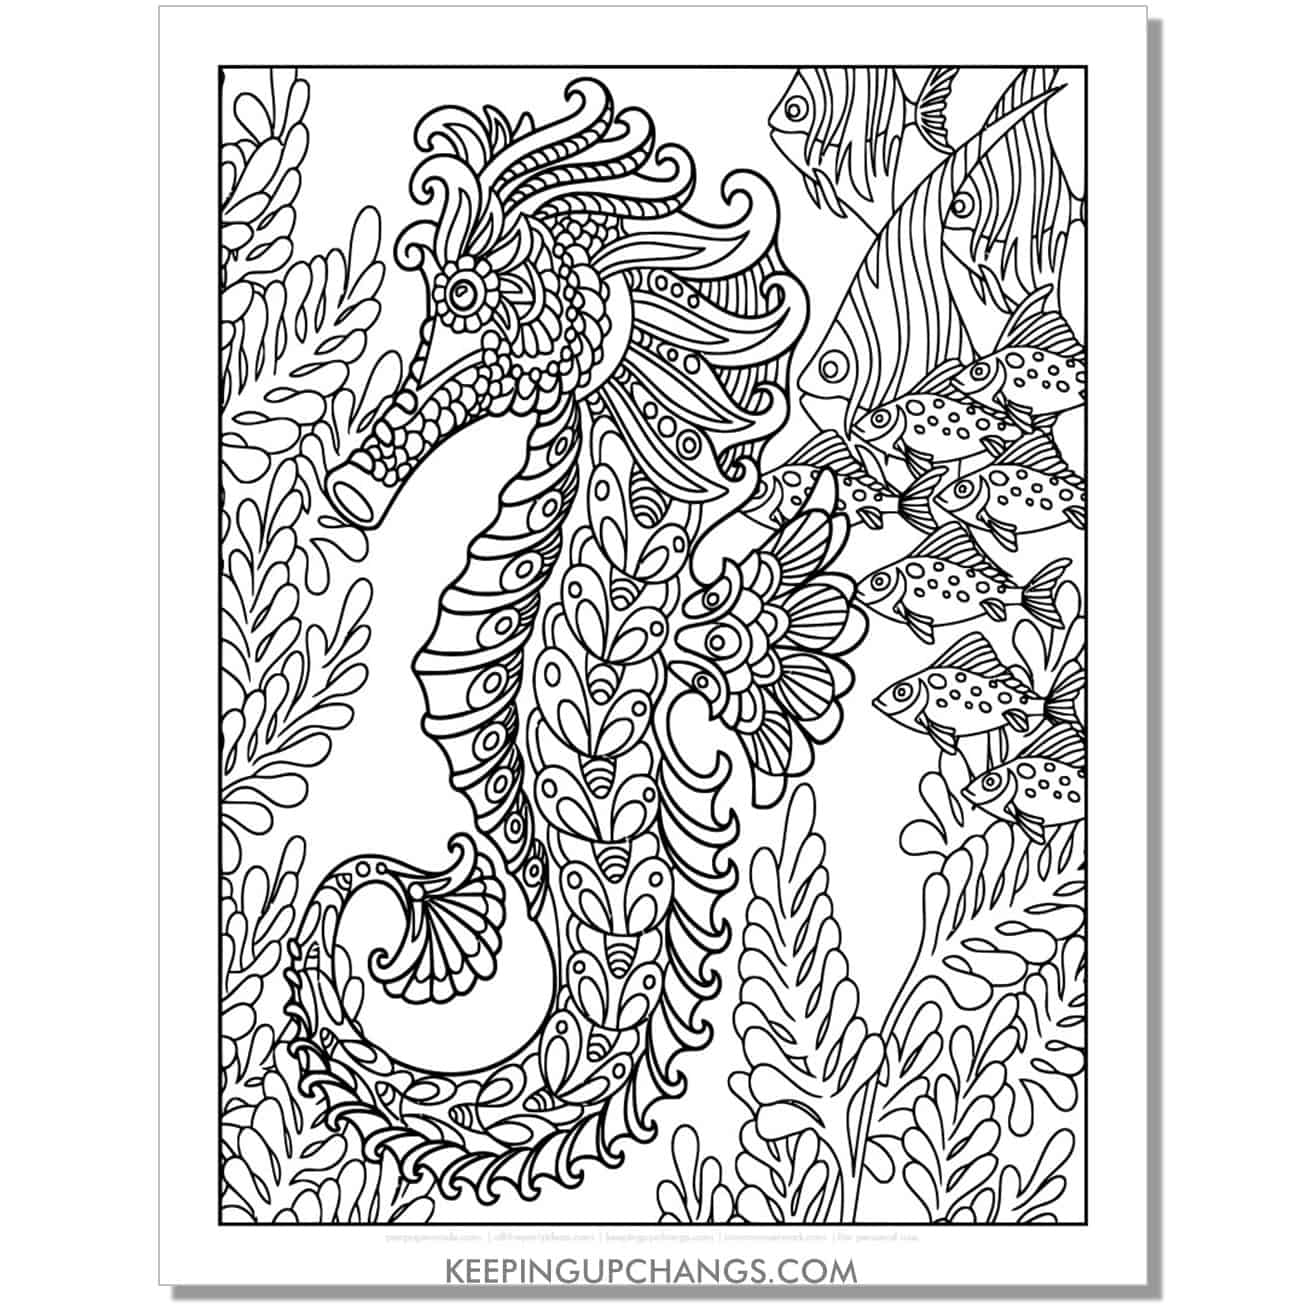 free advanced, complicated seahorse coloring page, sheet for adults.